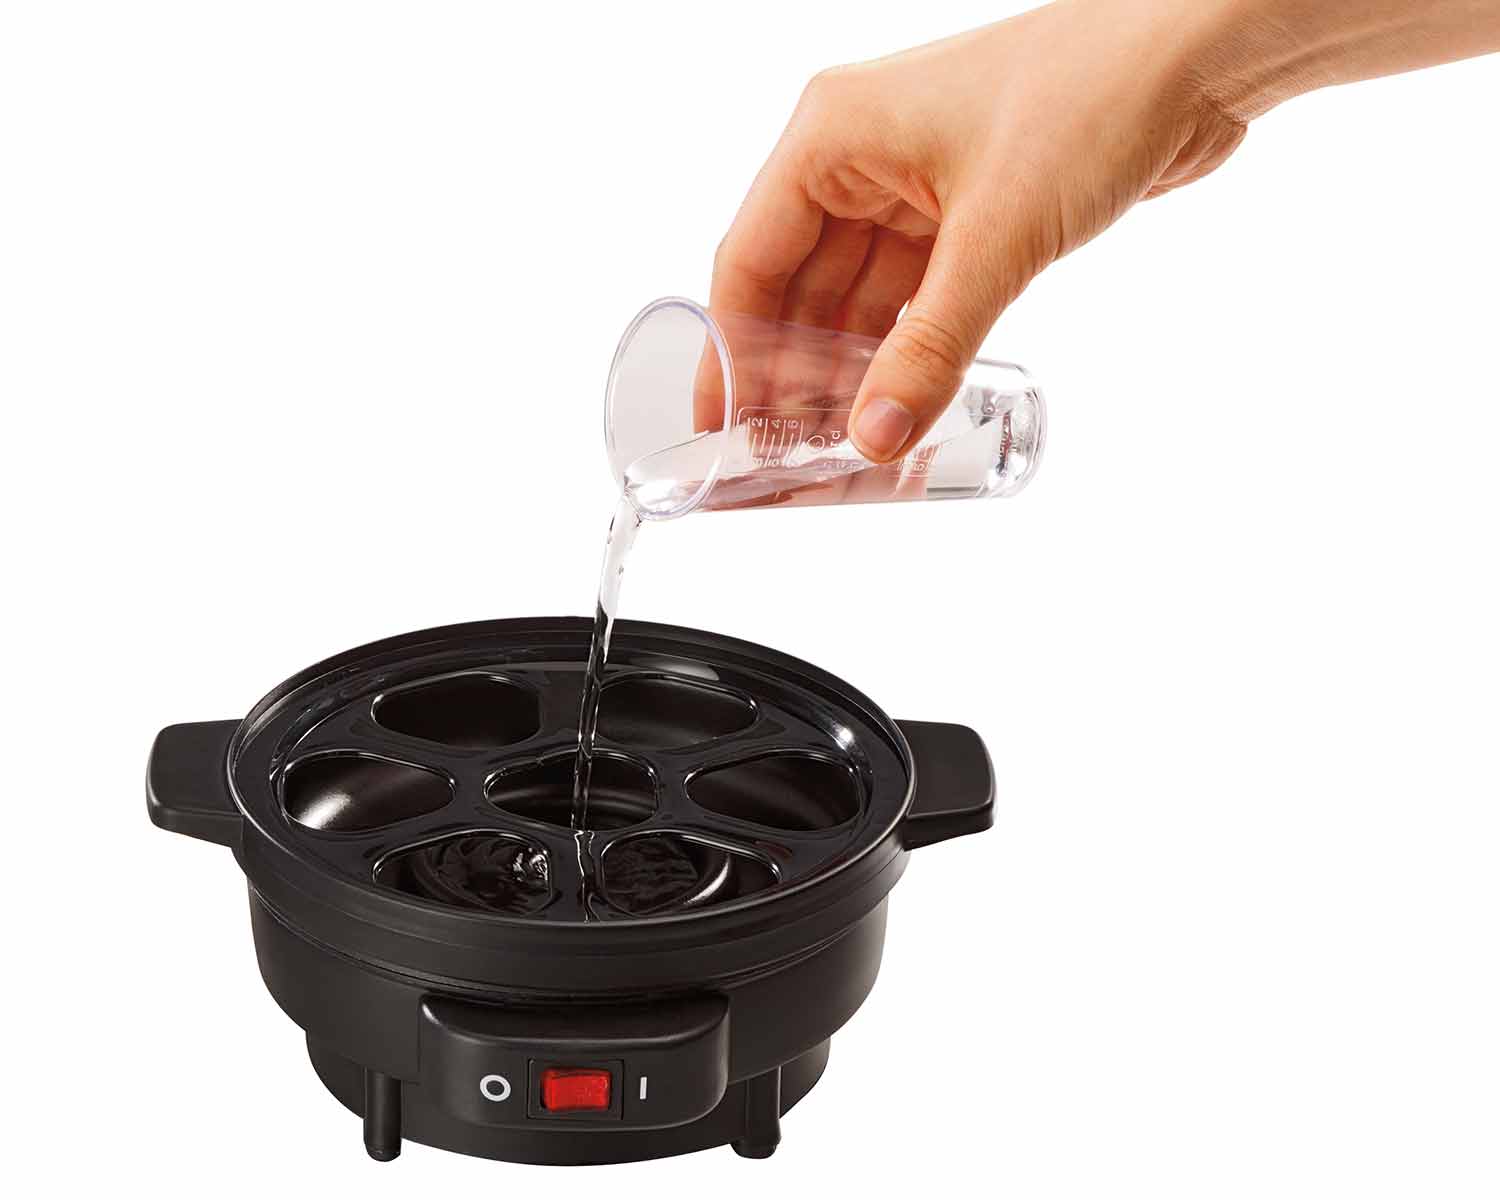 25500 Holds 7 Hard Boiled or Poached with Ready Timer Hamilton Beach Electric Egg Cooker and Poacher for Soft Black 